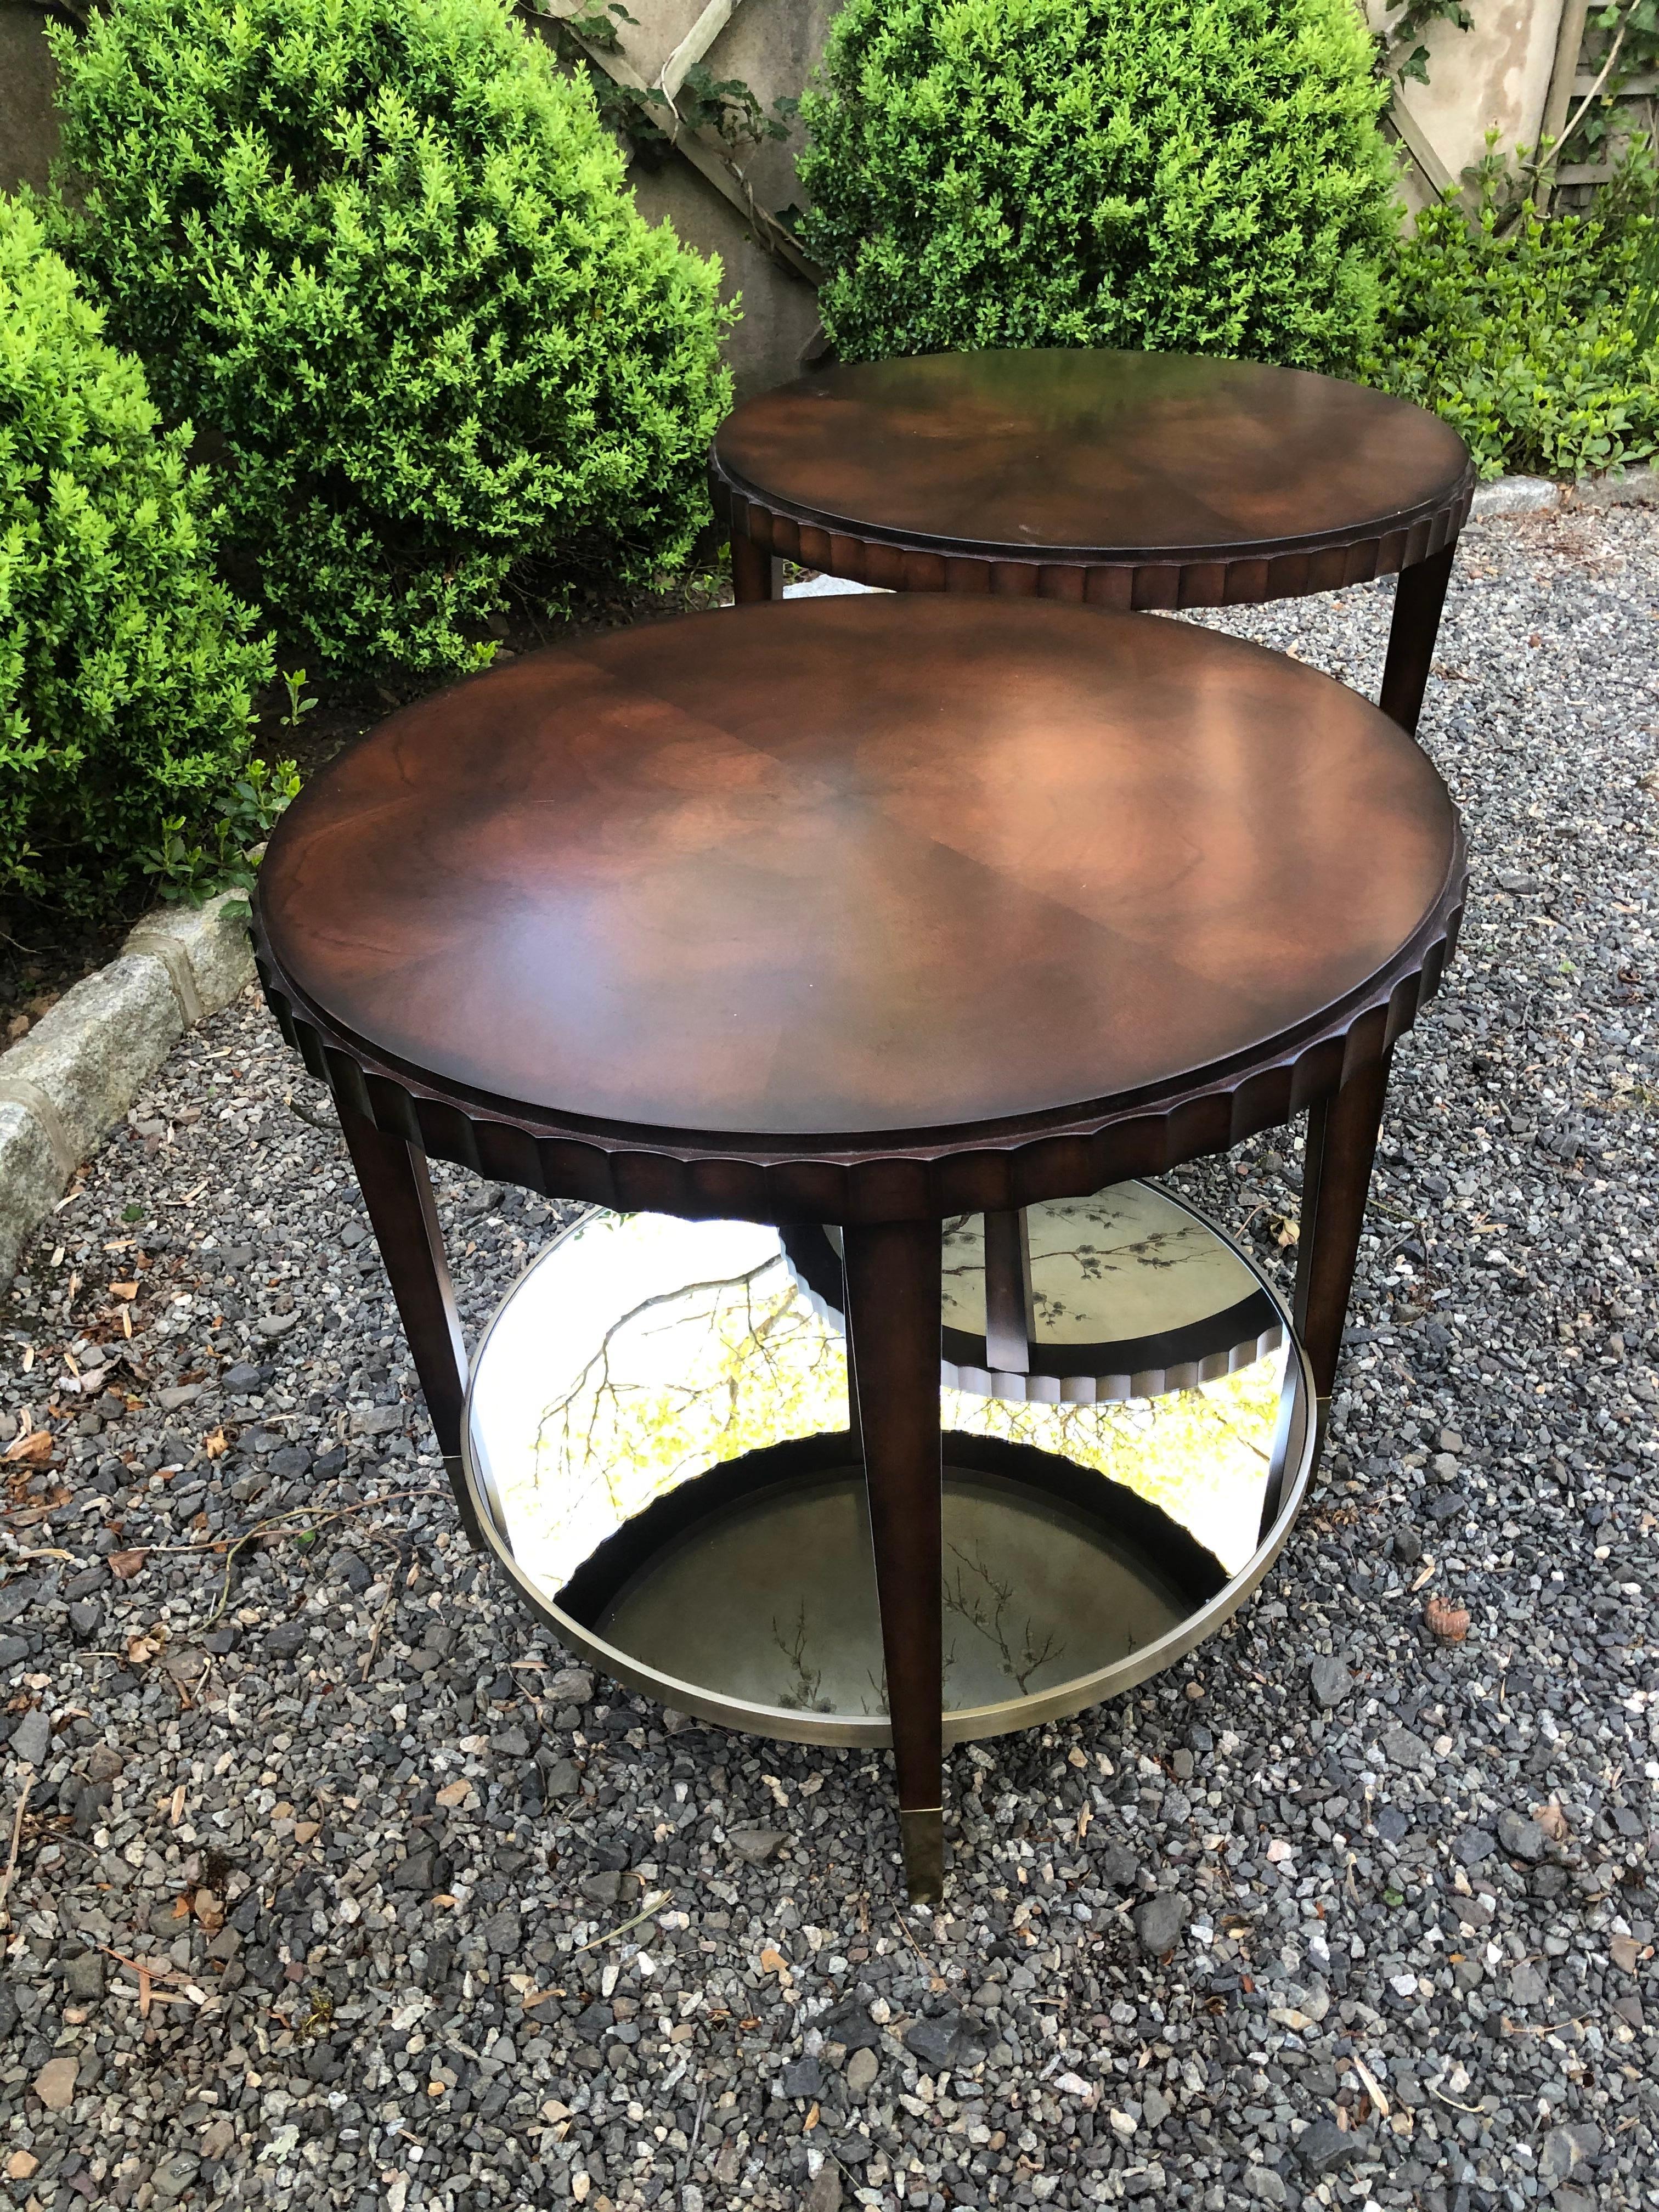 Pair of rich mahogany round side tables having clean lines and clever design with mirrored bottom shelves which reflects delicate painted cherry blossoms from the chinoiserie painted surface on the underside of the table's top. The table's apron is